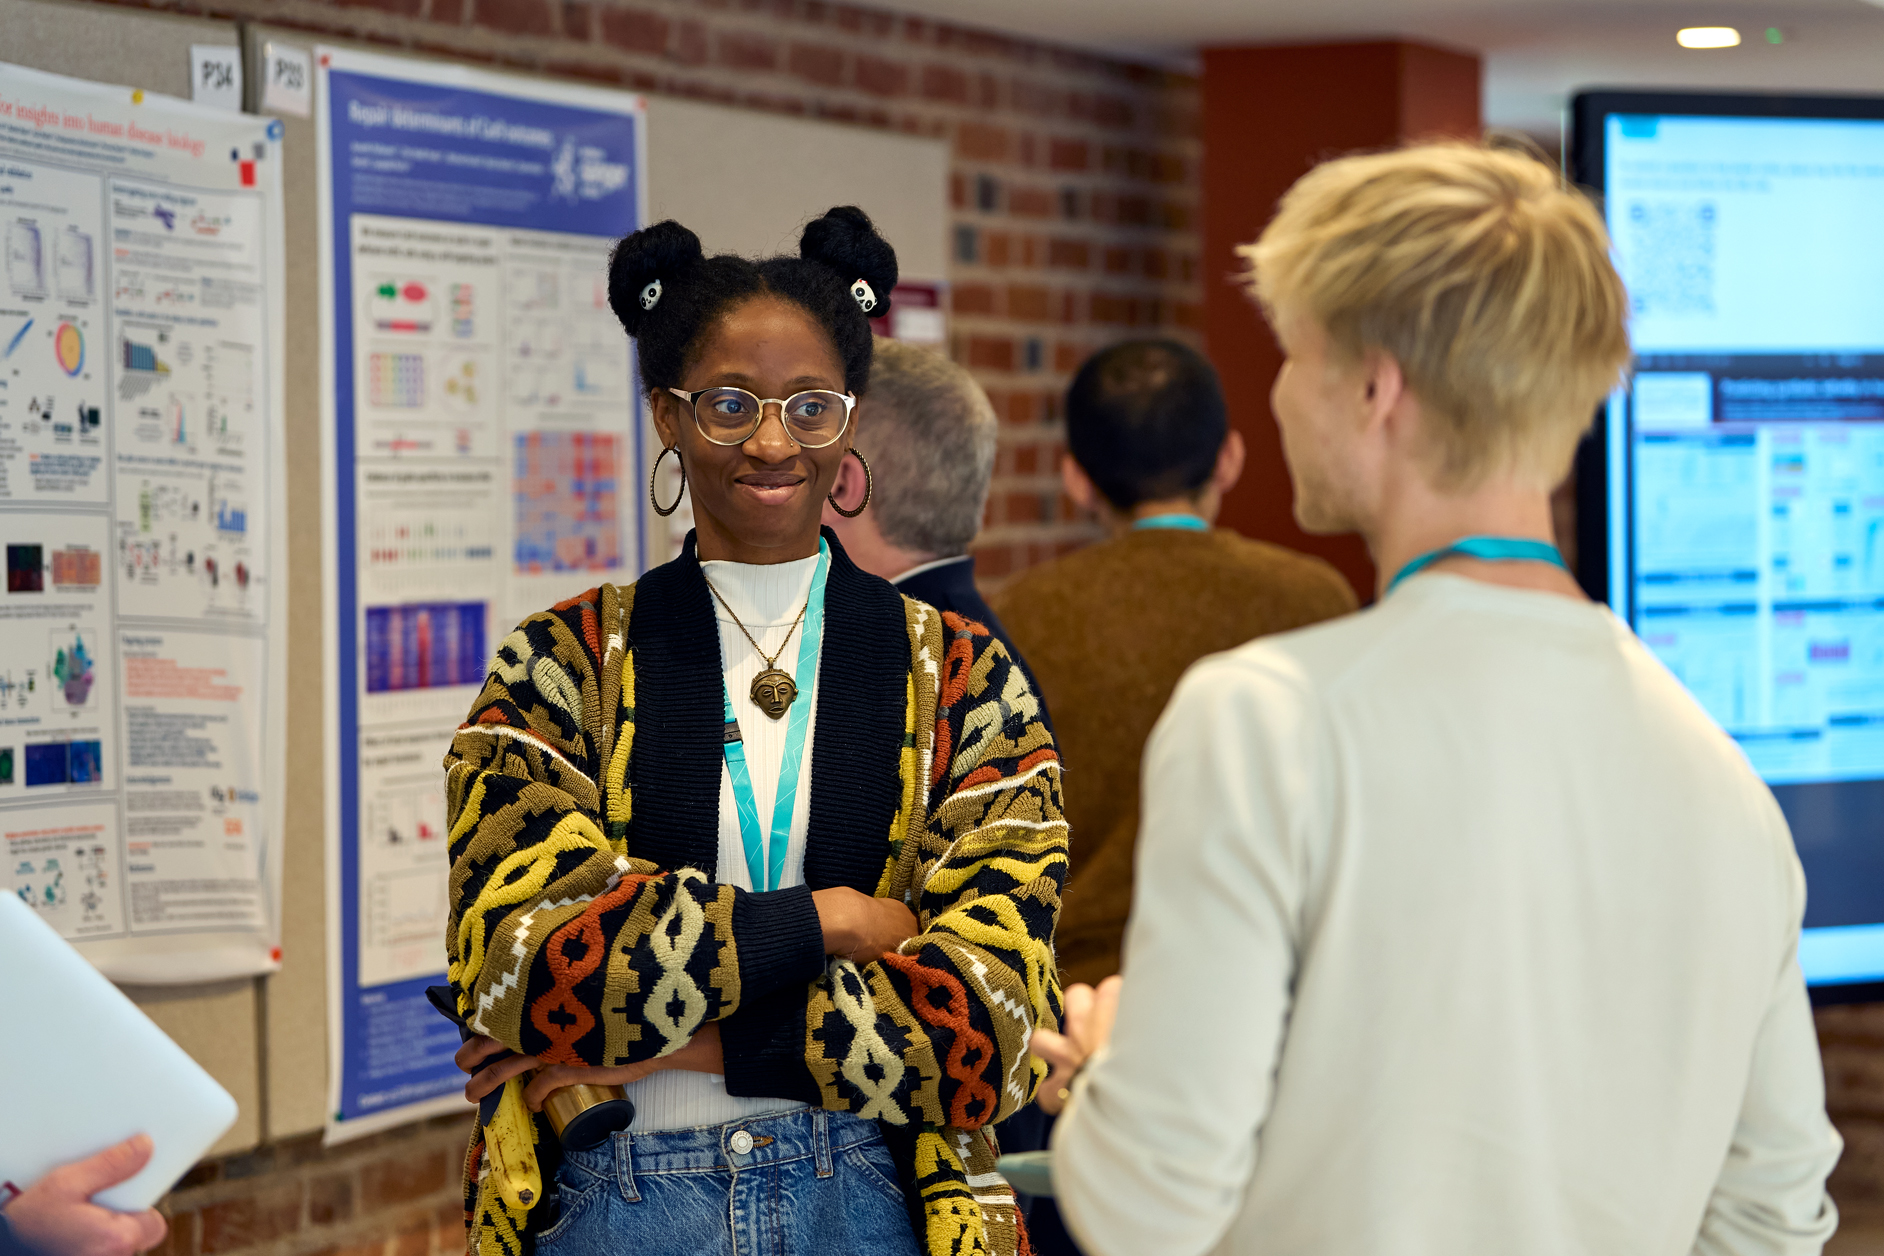 Two conference delegates engaged in conversion during a networking break. They are standing near a series of scientific posters pinned to boards. A digital poster board is also in view. Image credit: Ben McDade Photography for Connecting Science. 